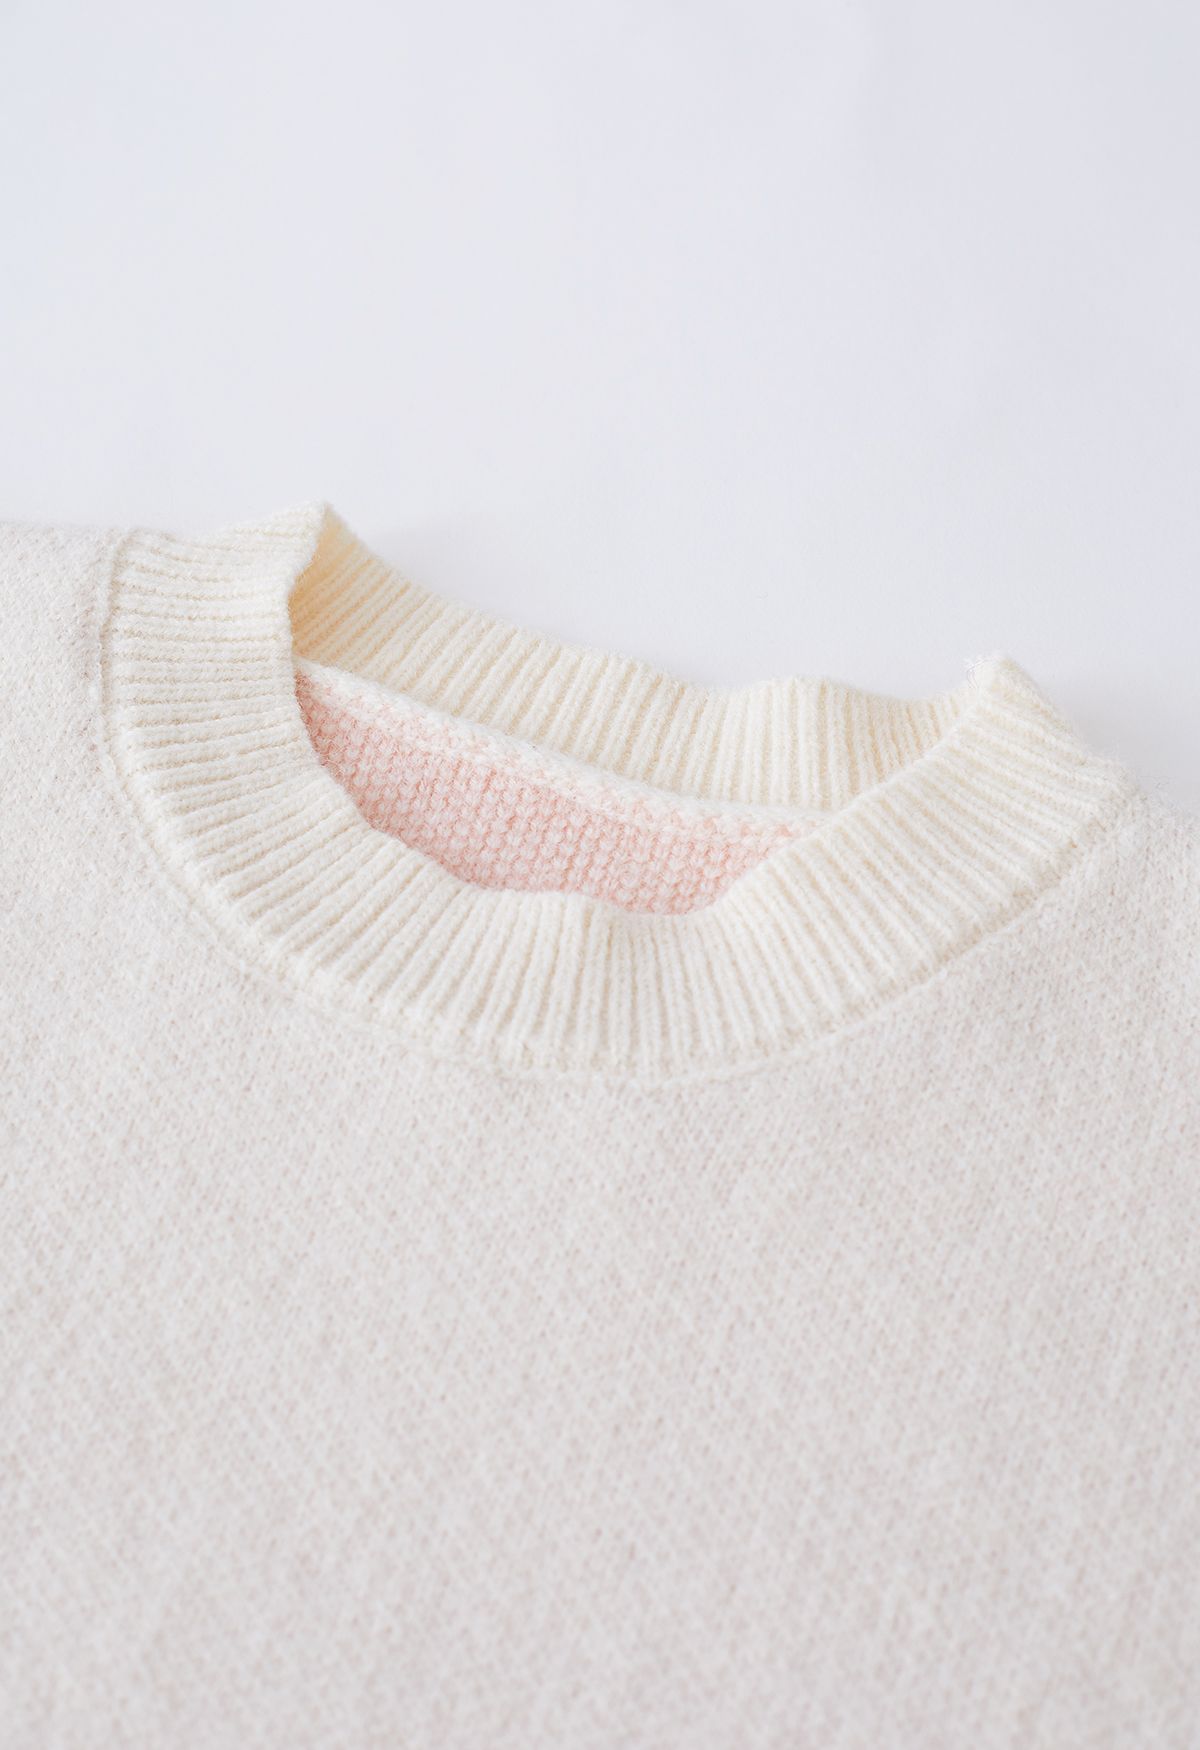 Tender Fuzzy Heart Jacquard Knit Sweater in Ivory - Retro, Indie and ...